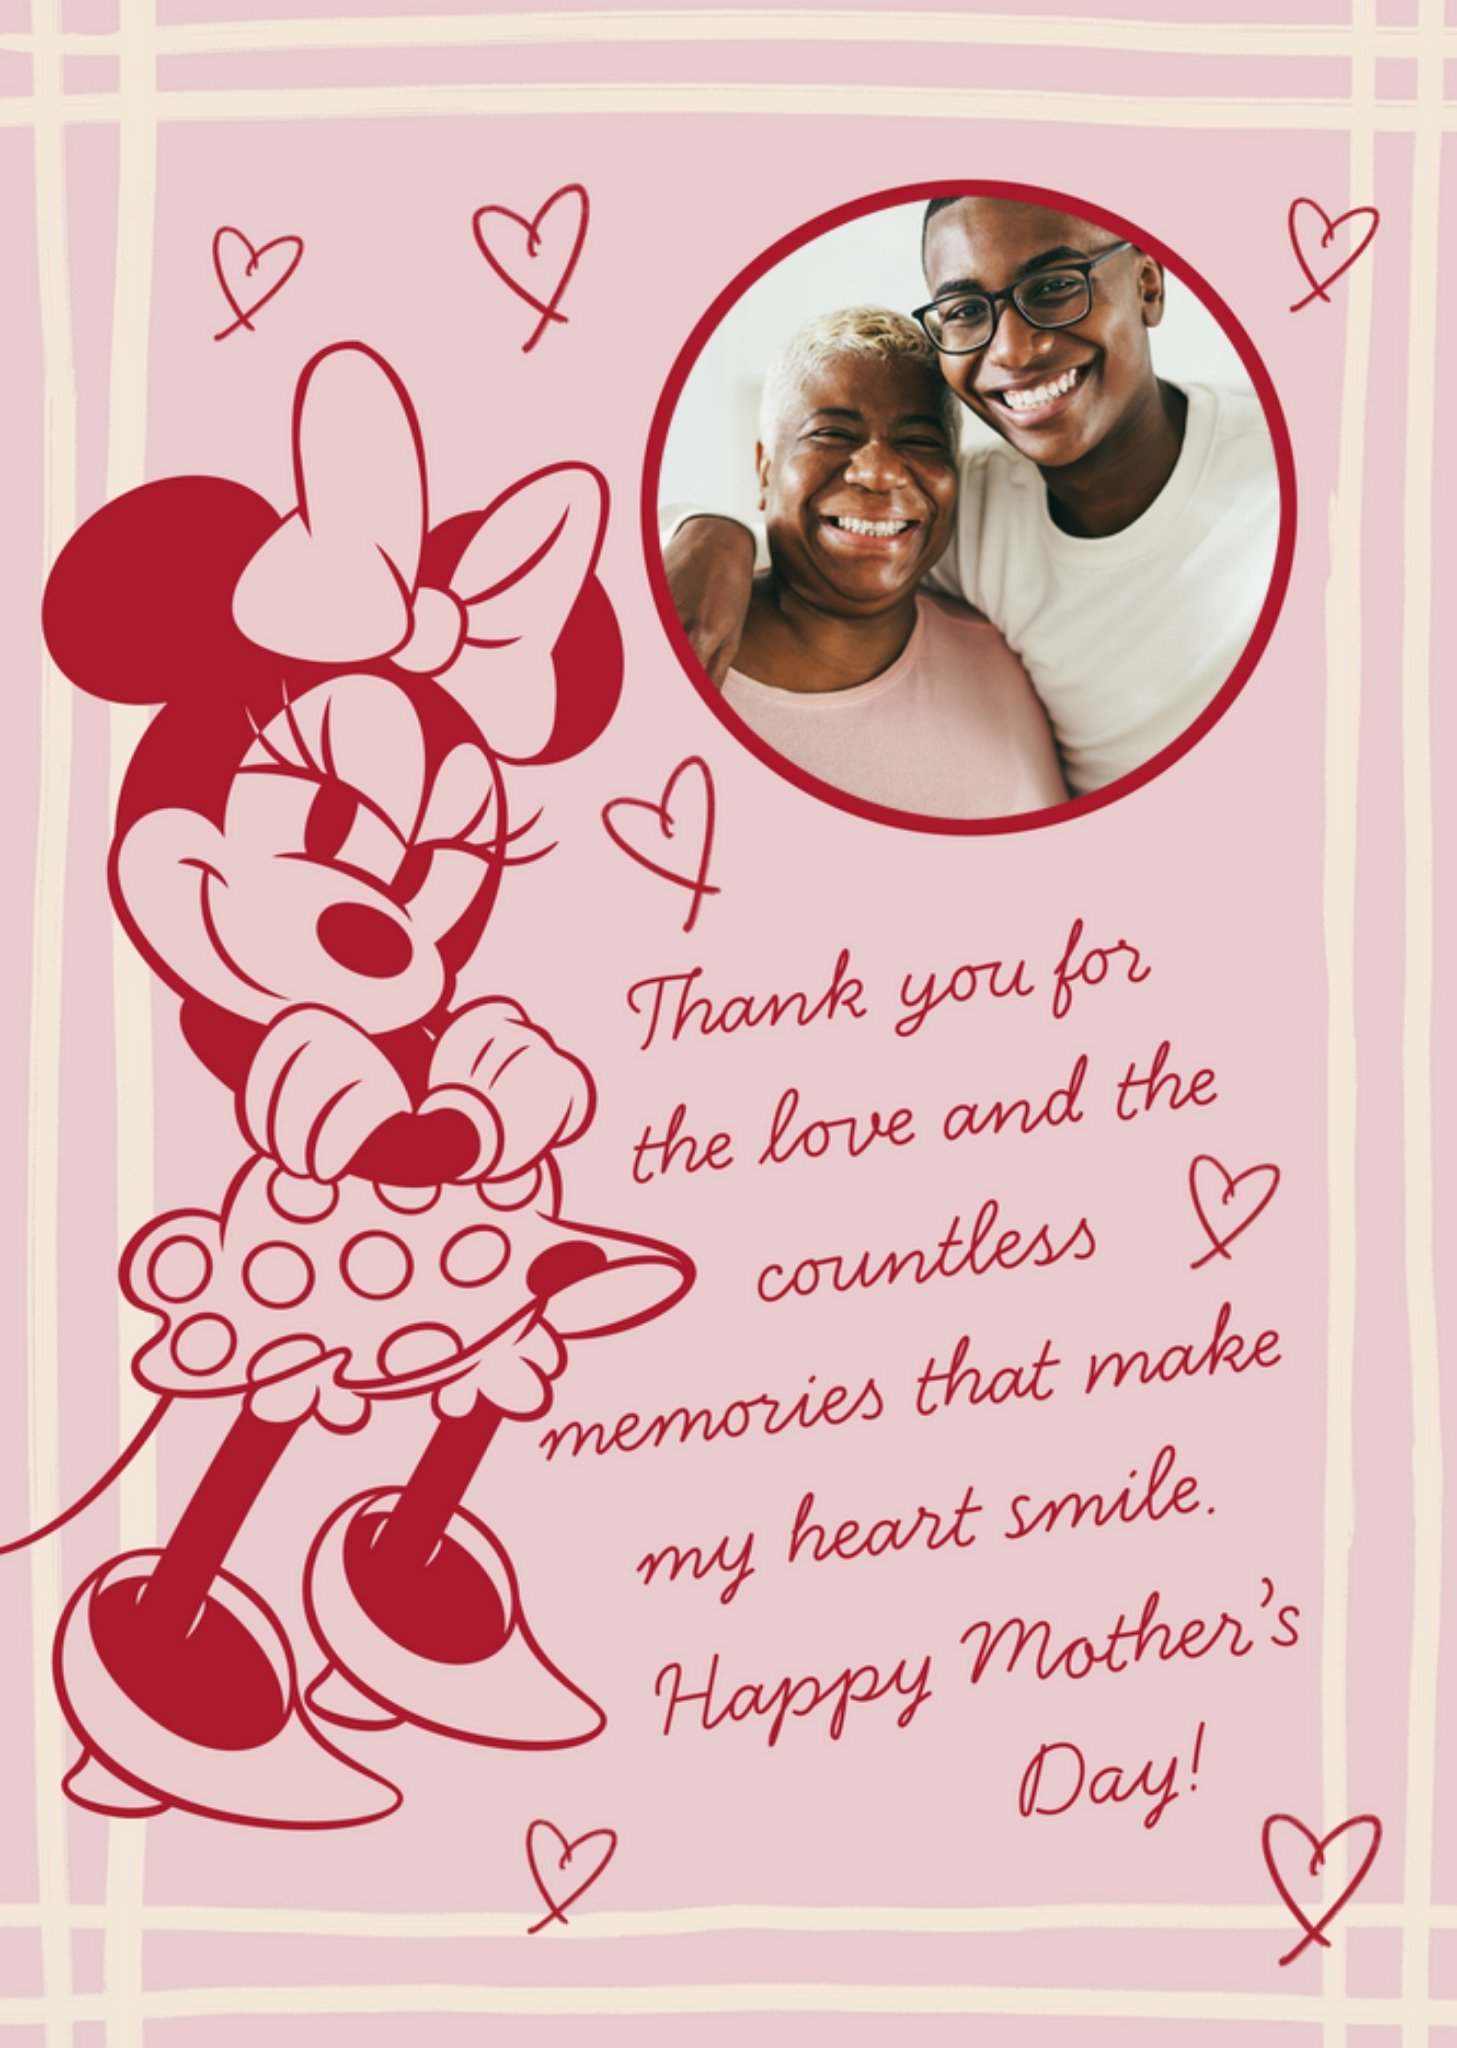 Mickey Mouse Disney Minnie Mouse Love And Countless Memories Photo Upload Happy Mother's Day Card Ec